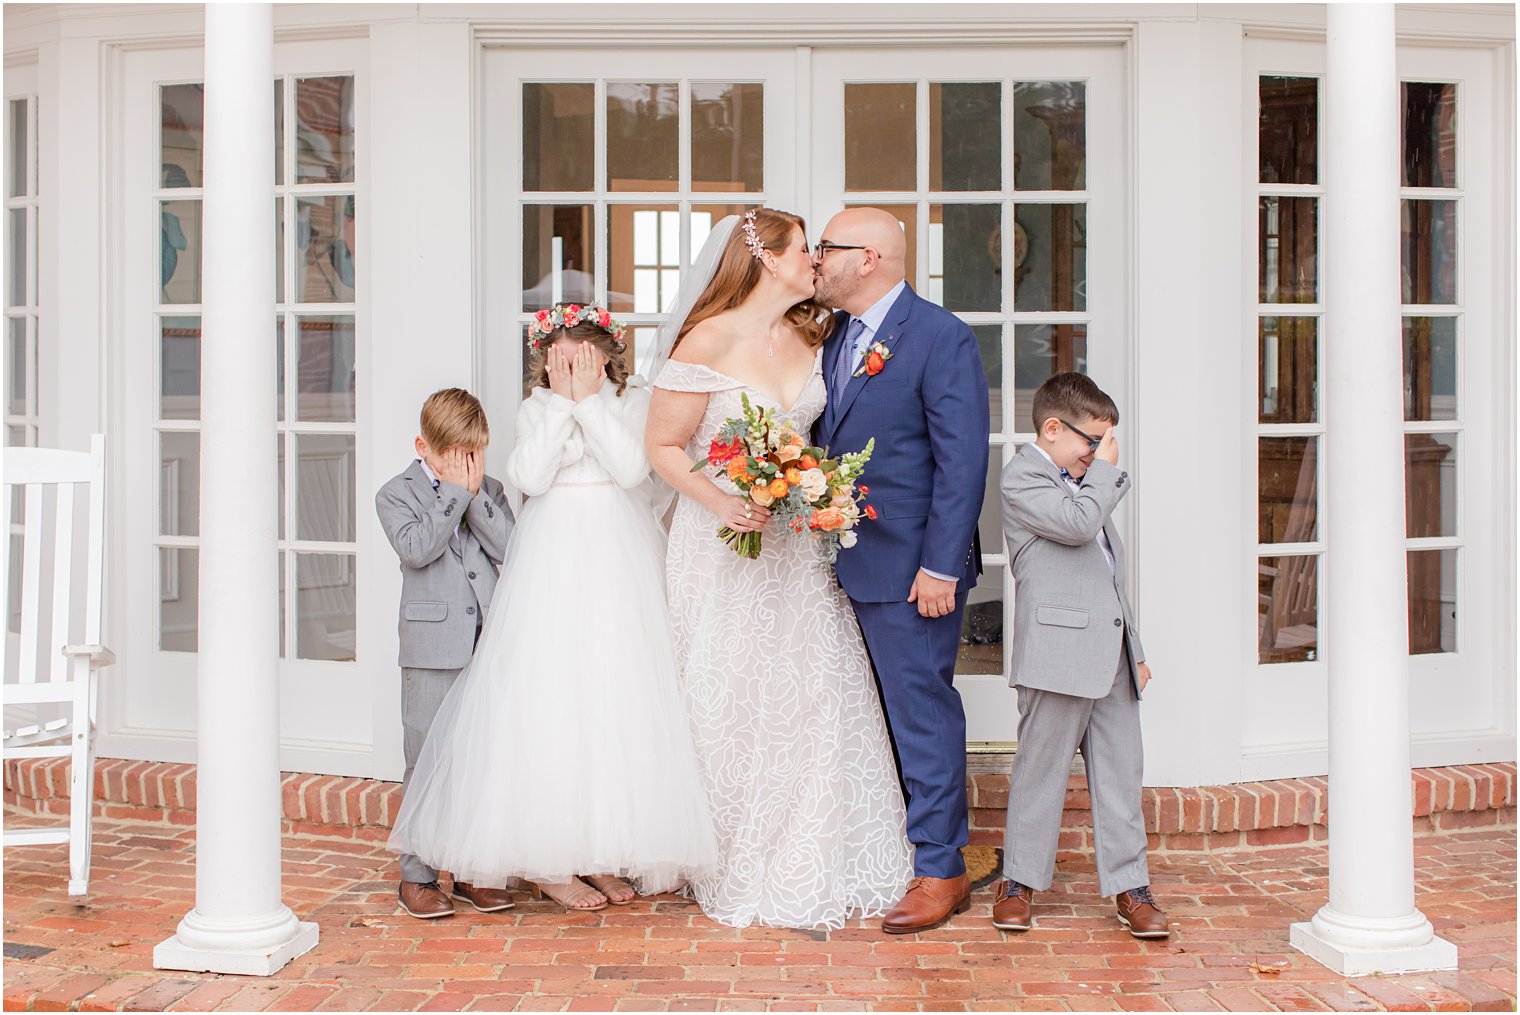 bride and groom kiss while kids hide eyes playfully